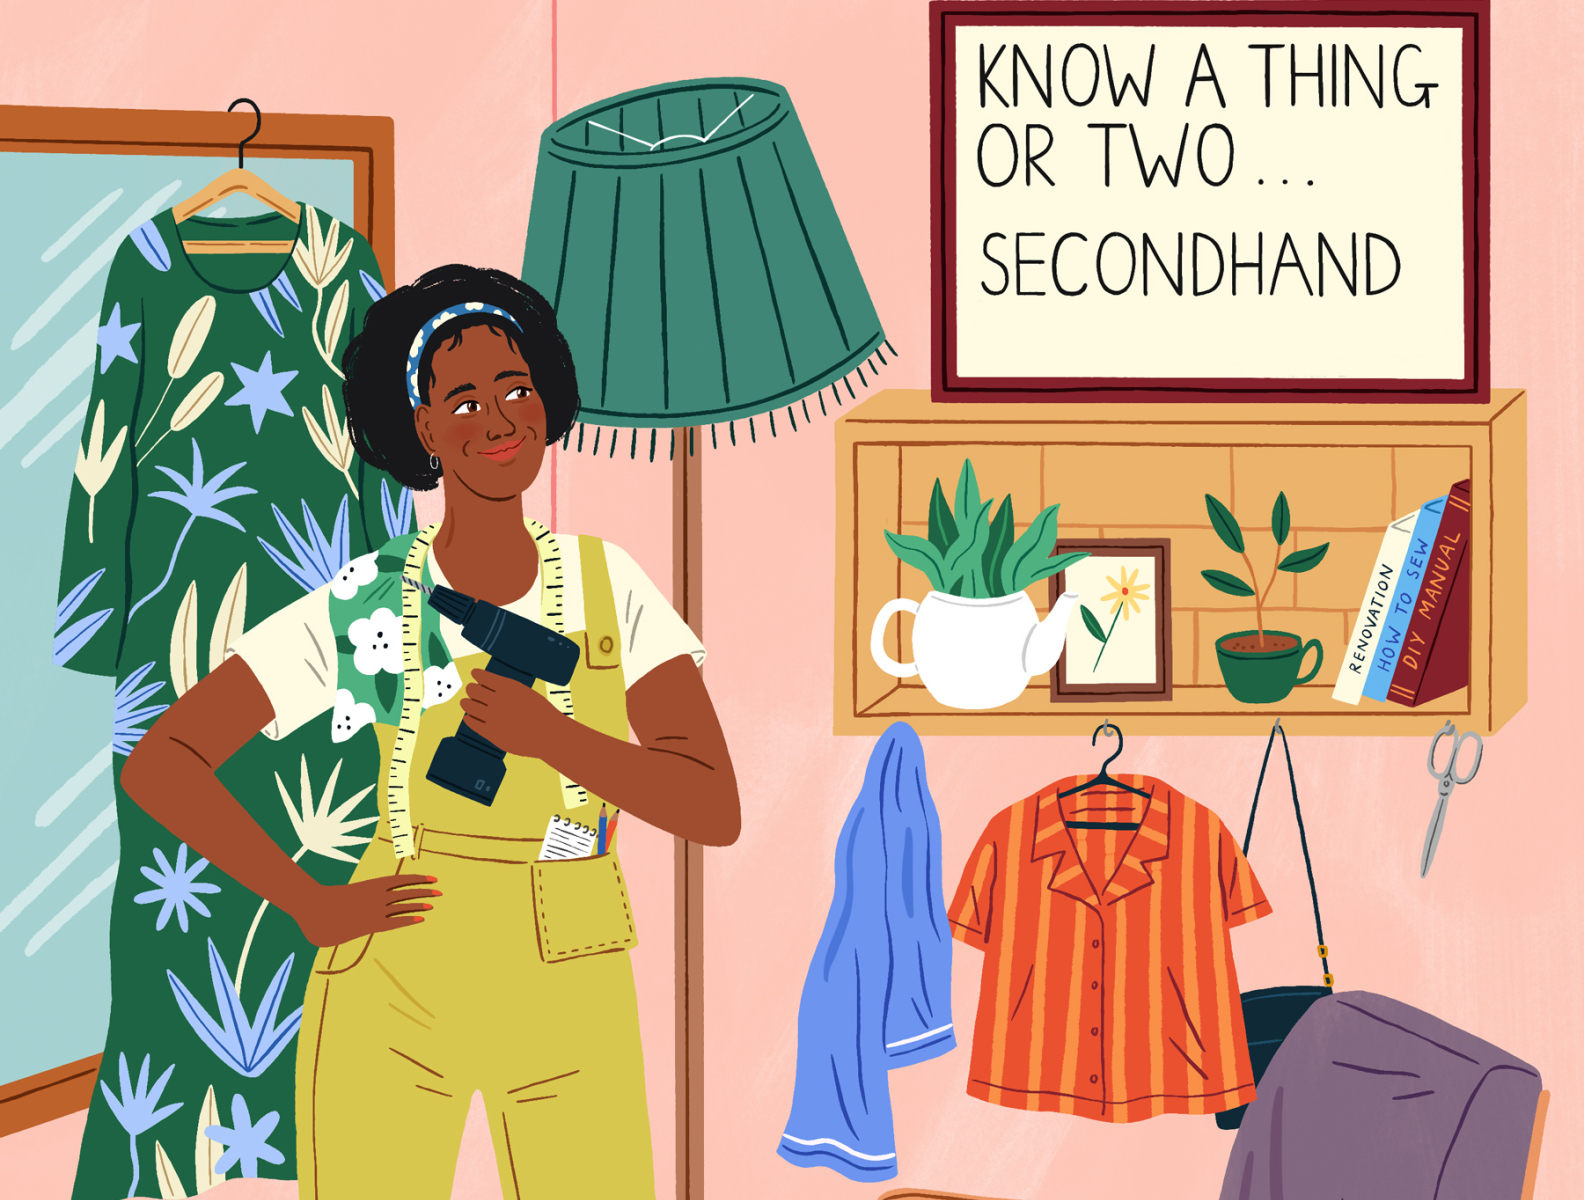 Secondhand by Folio Illustration Agency on Dribbble